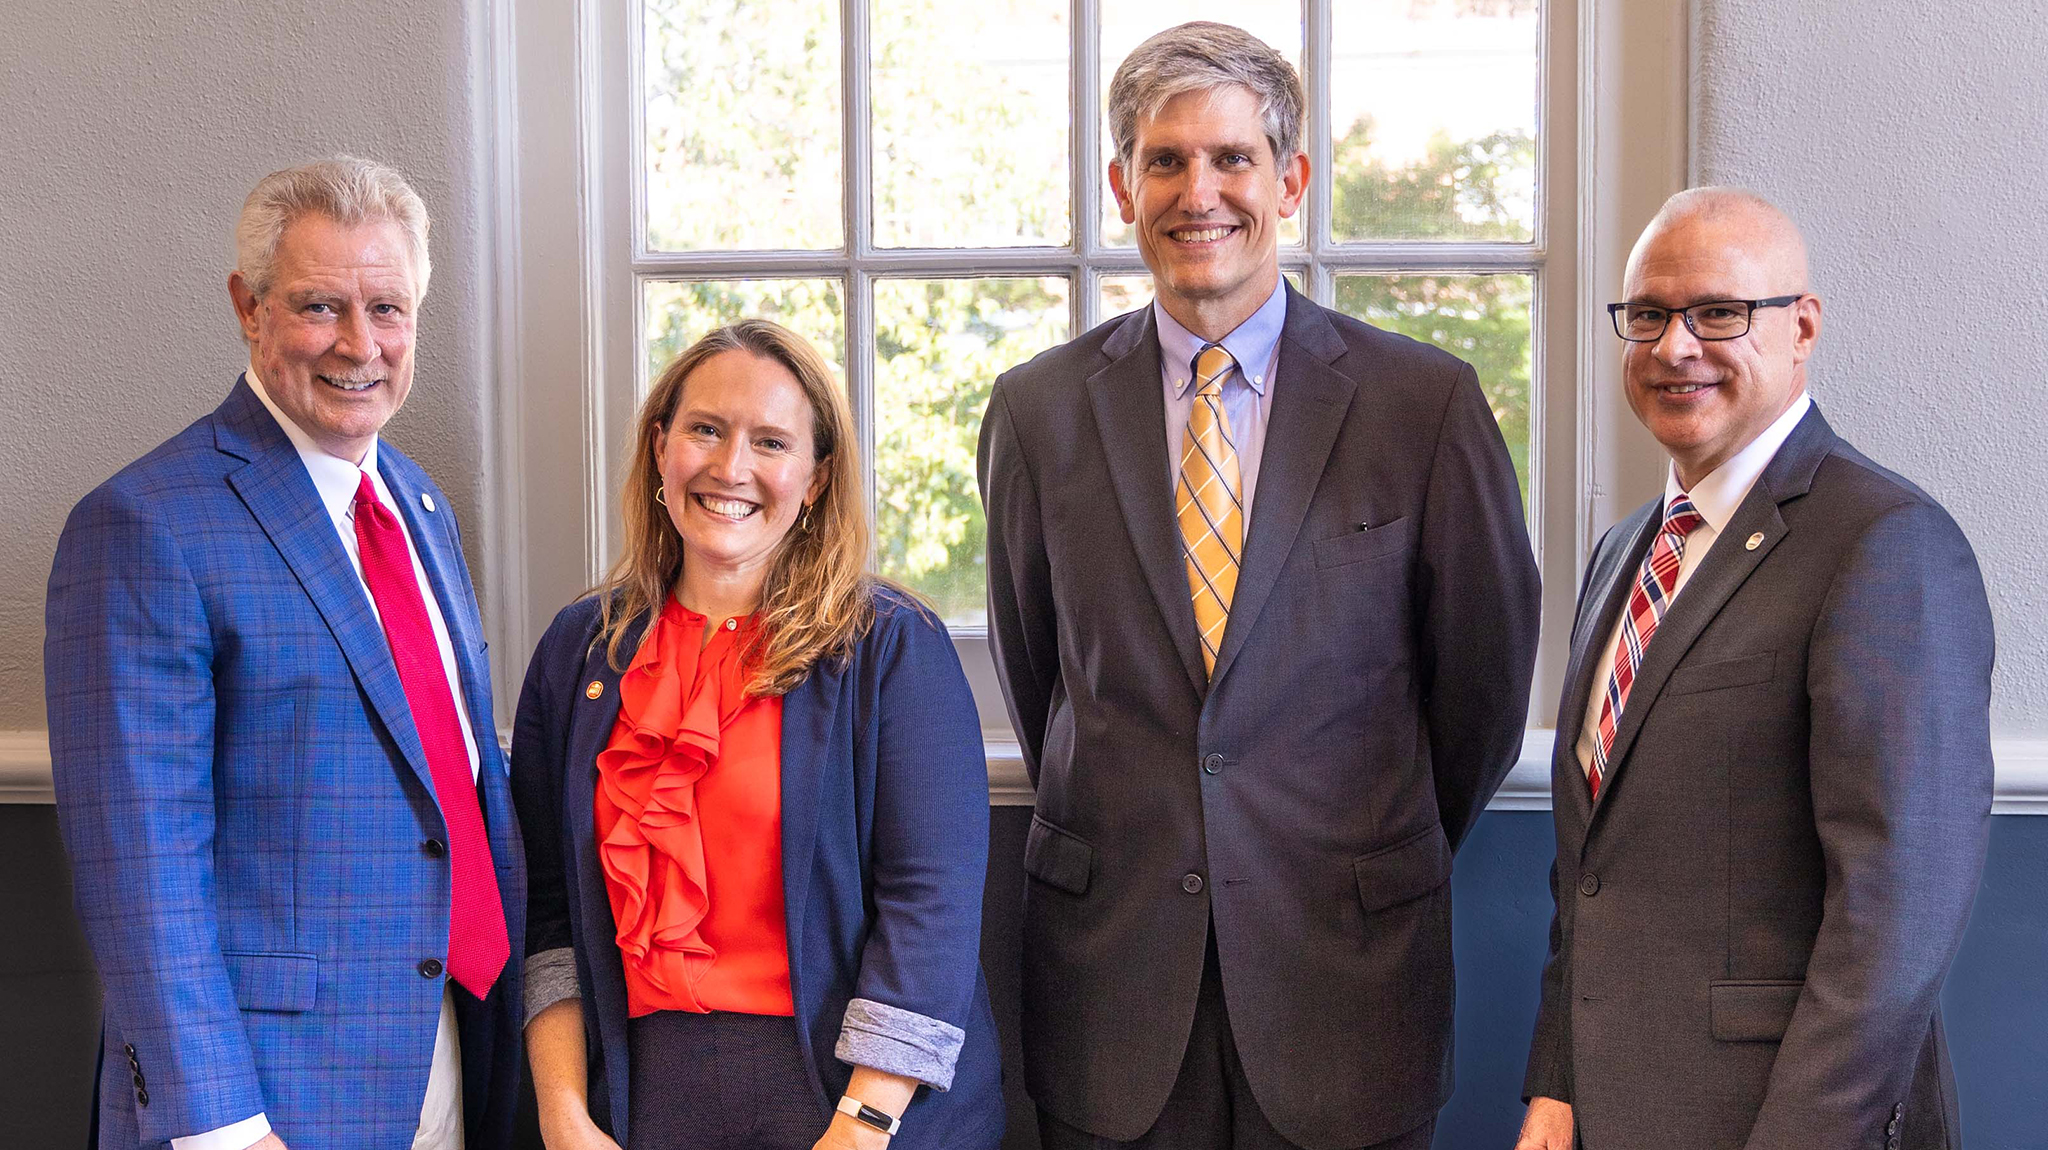 New Prize Aims to Fulfill Students' Greatest Potential - Ole Miss News